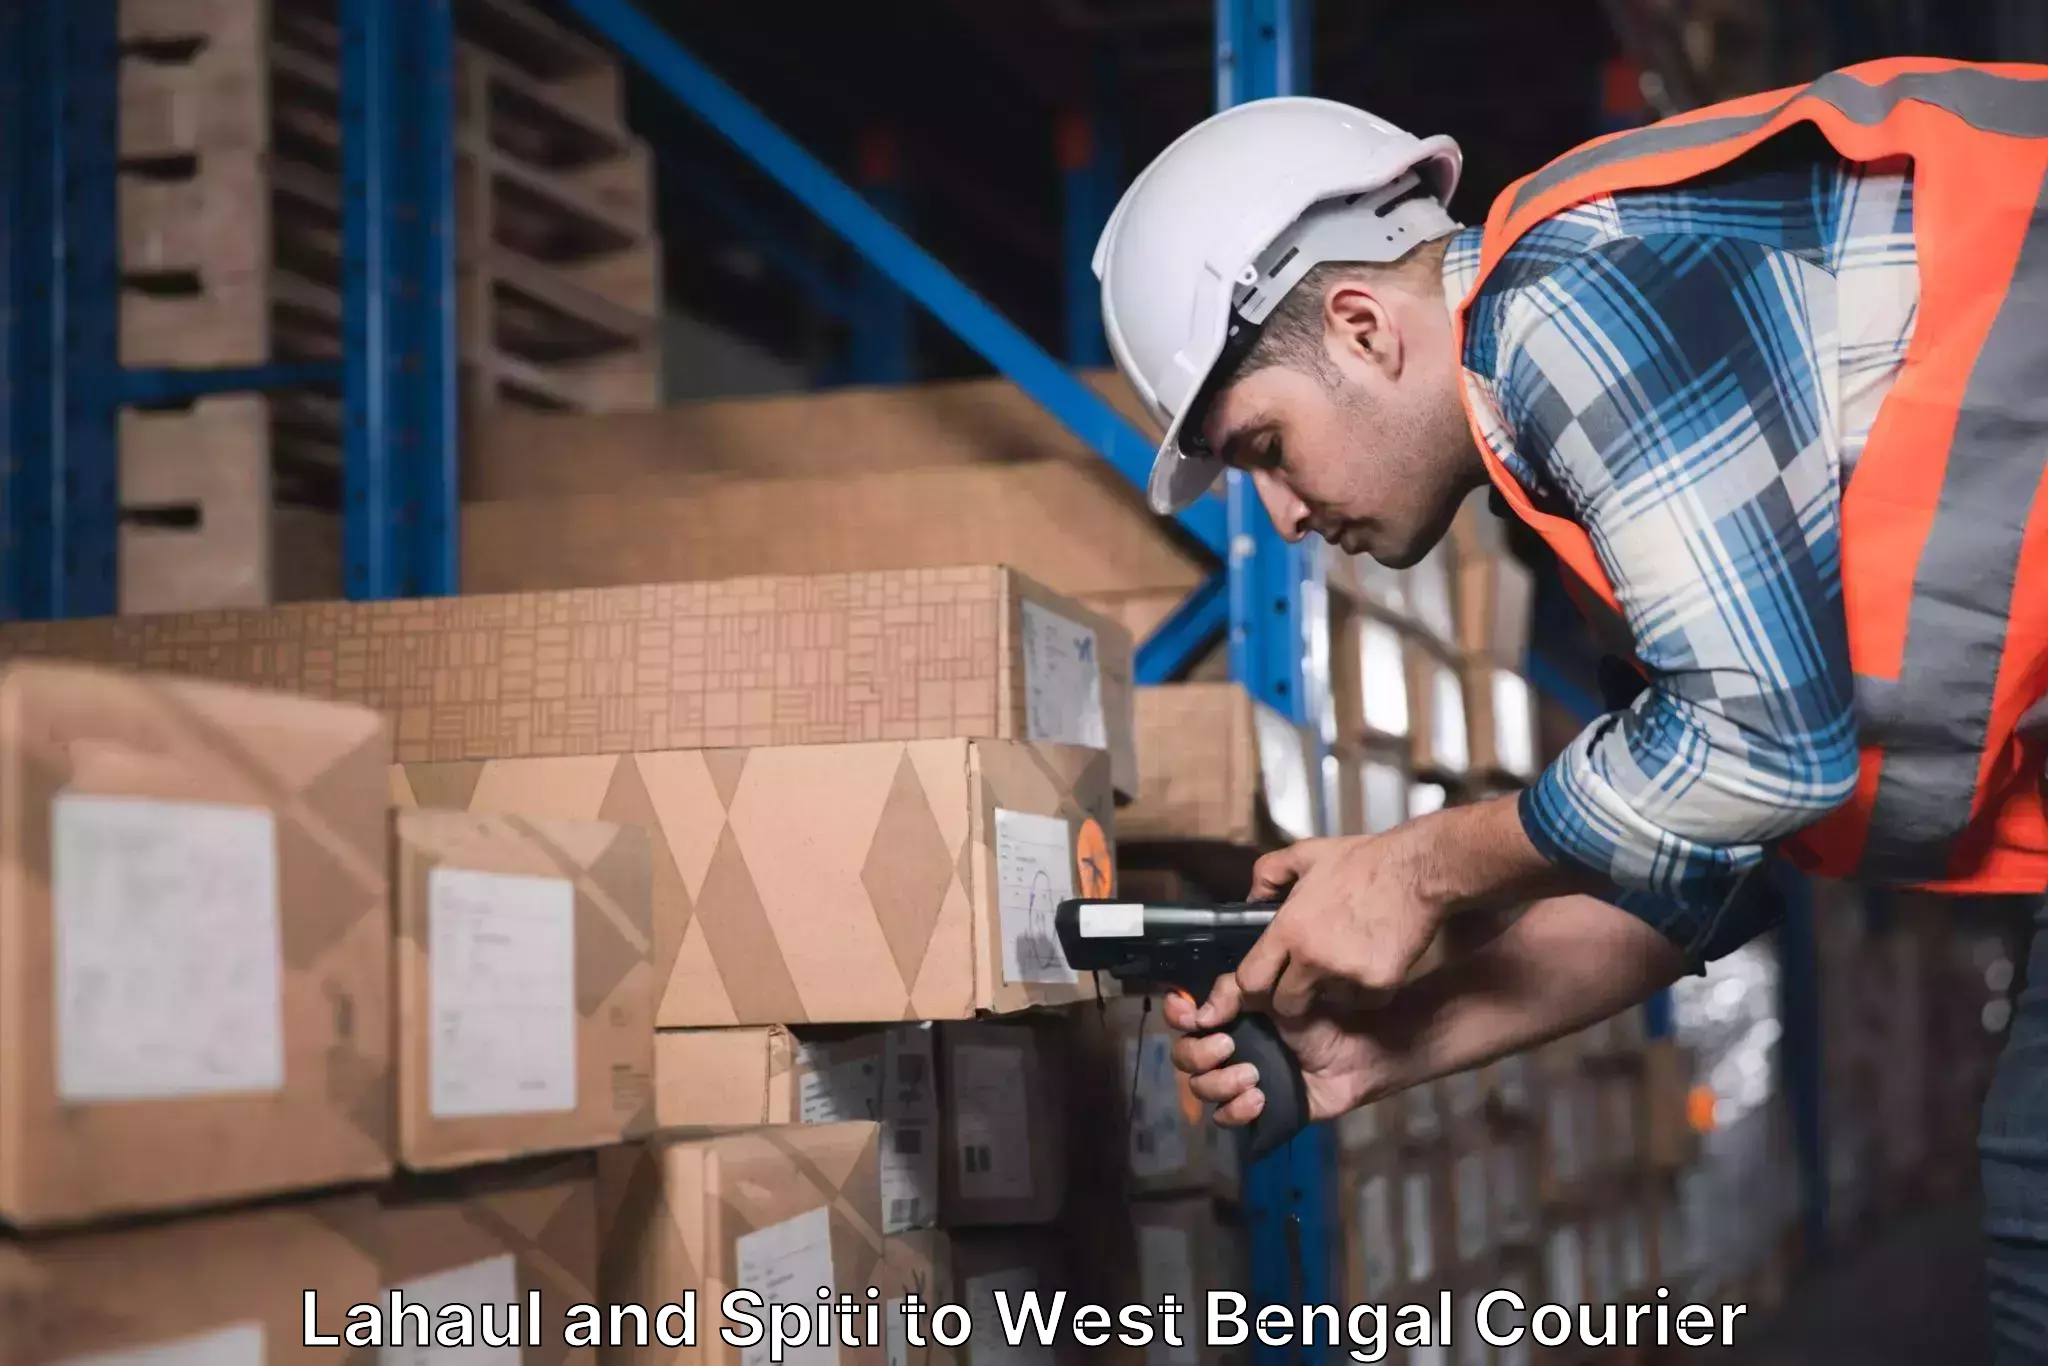 Nationwide shipping coverage Lahaul and Spiti to West Bengal